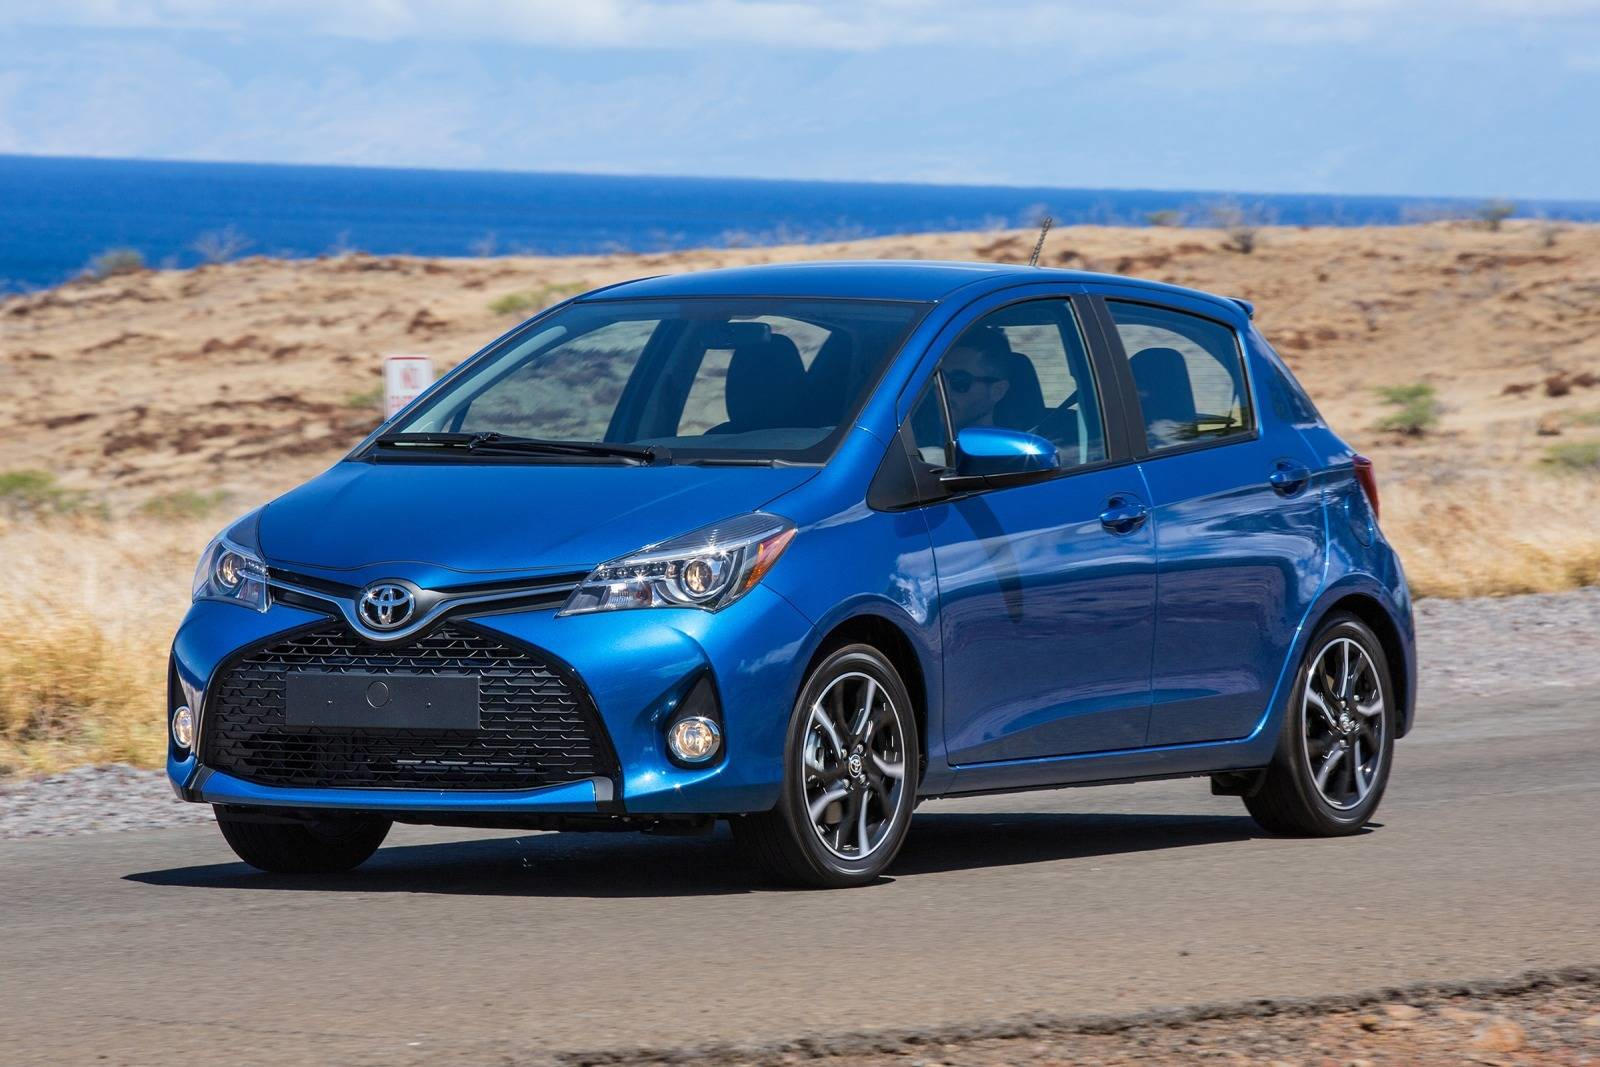 2018 Toyota Yaris Hatchback Review, Trims, Specs and Price